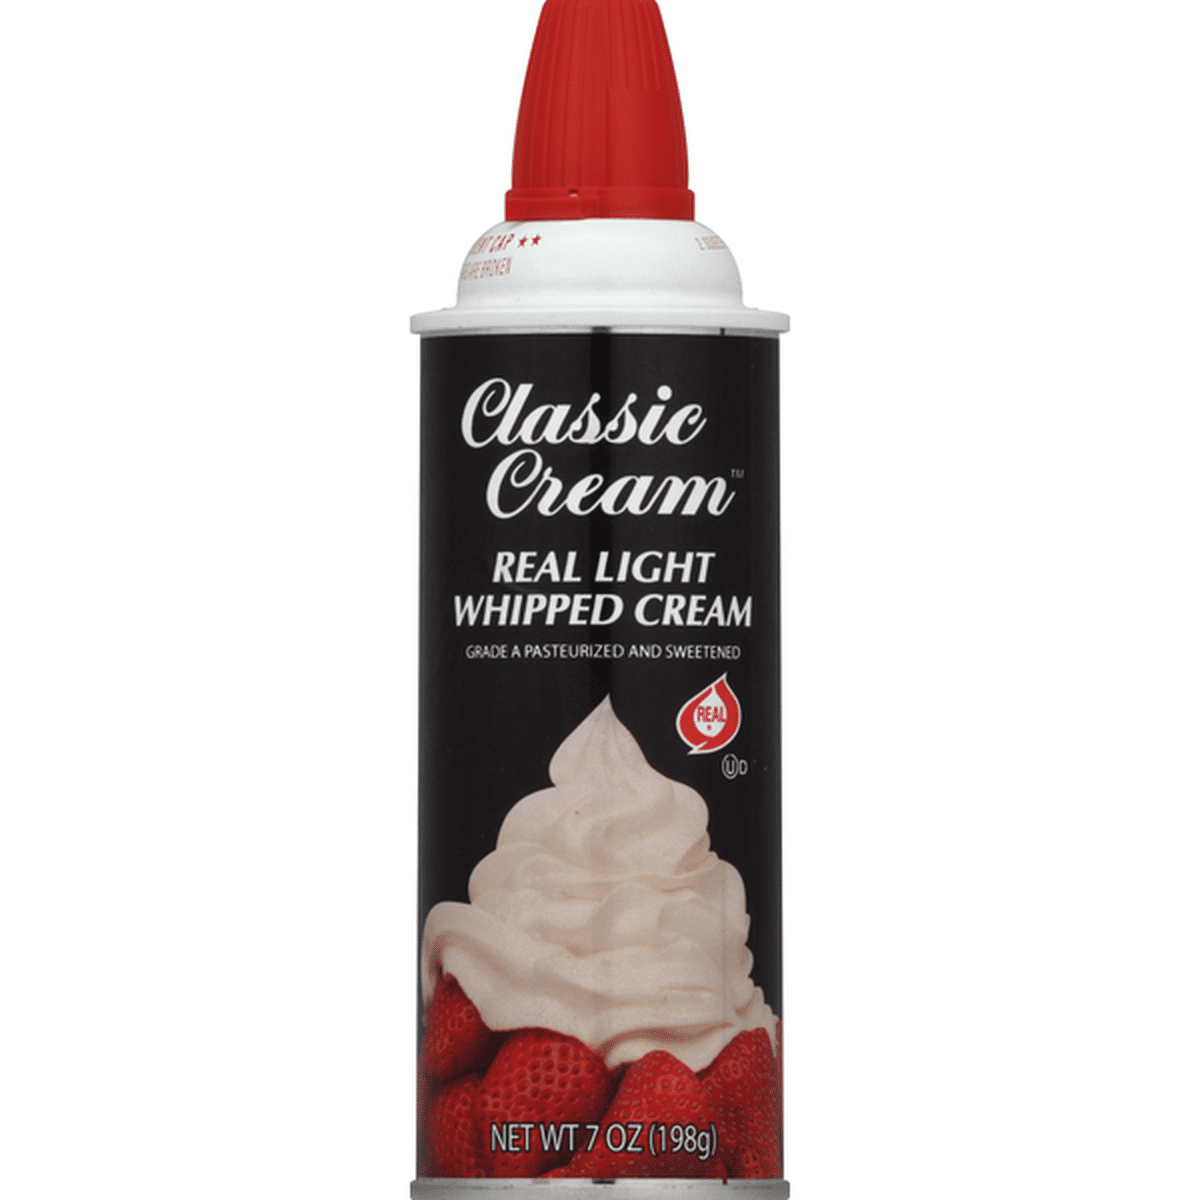 Classic Cream Whipped Cream, Real Light (7 oz) Delivery or Pickup